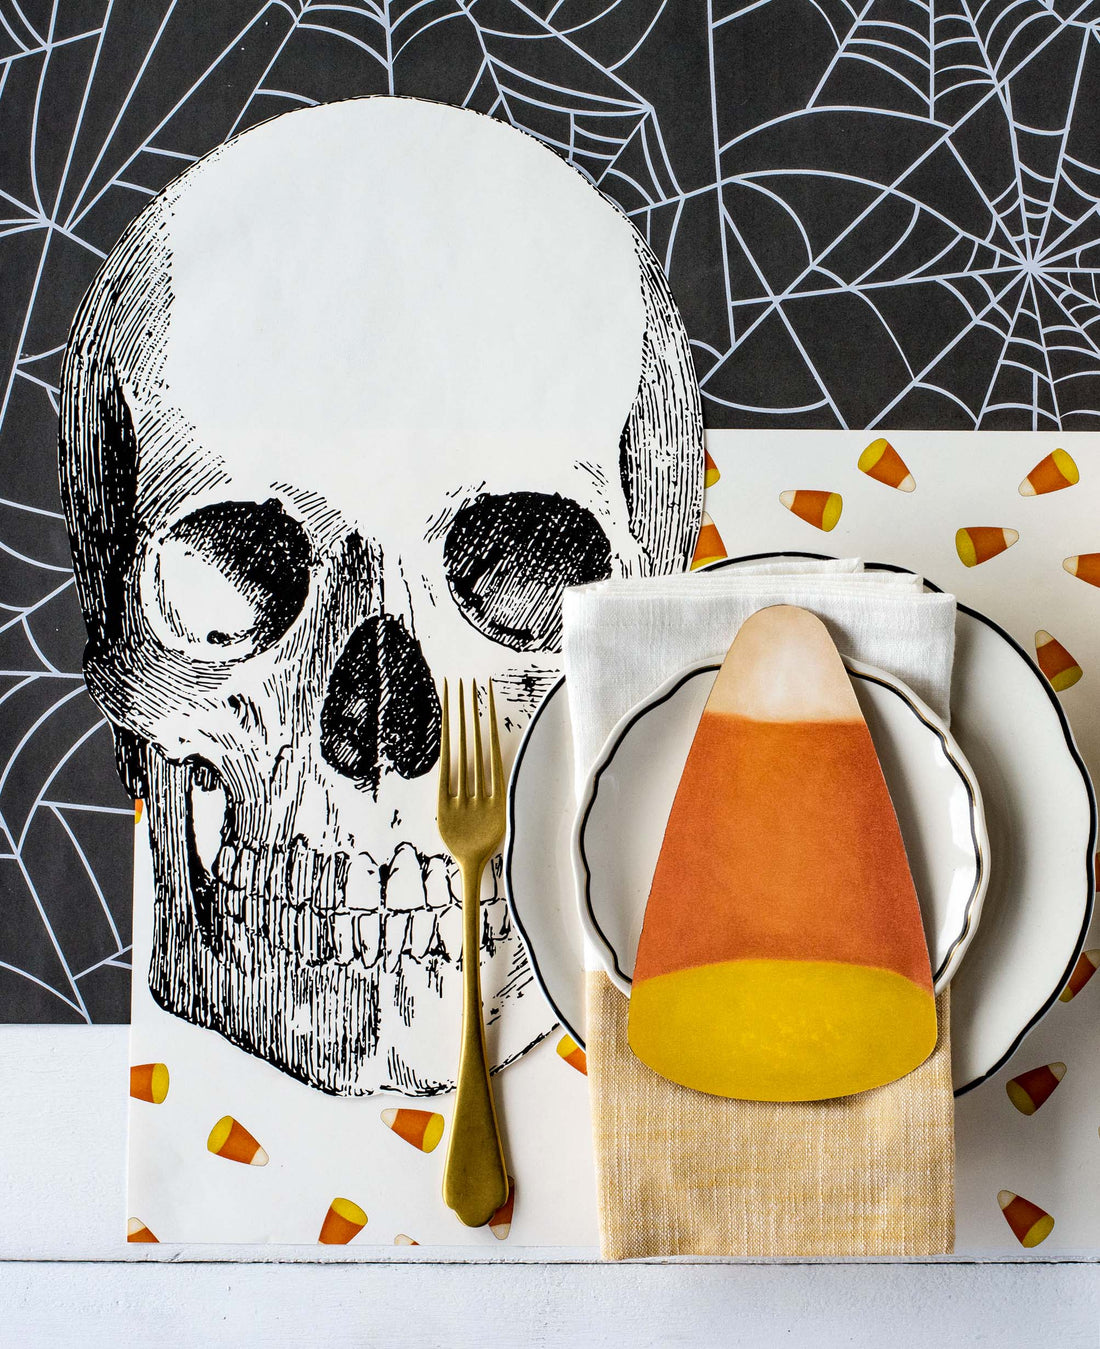 The Die-cut Skull Placemat under a spooky Halloween-themed place setting, from above.